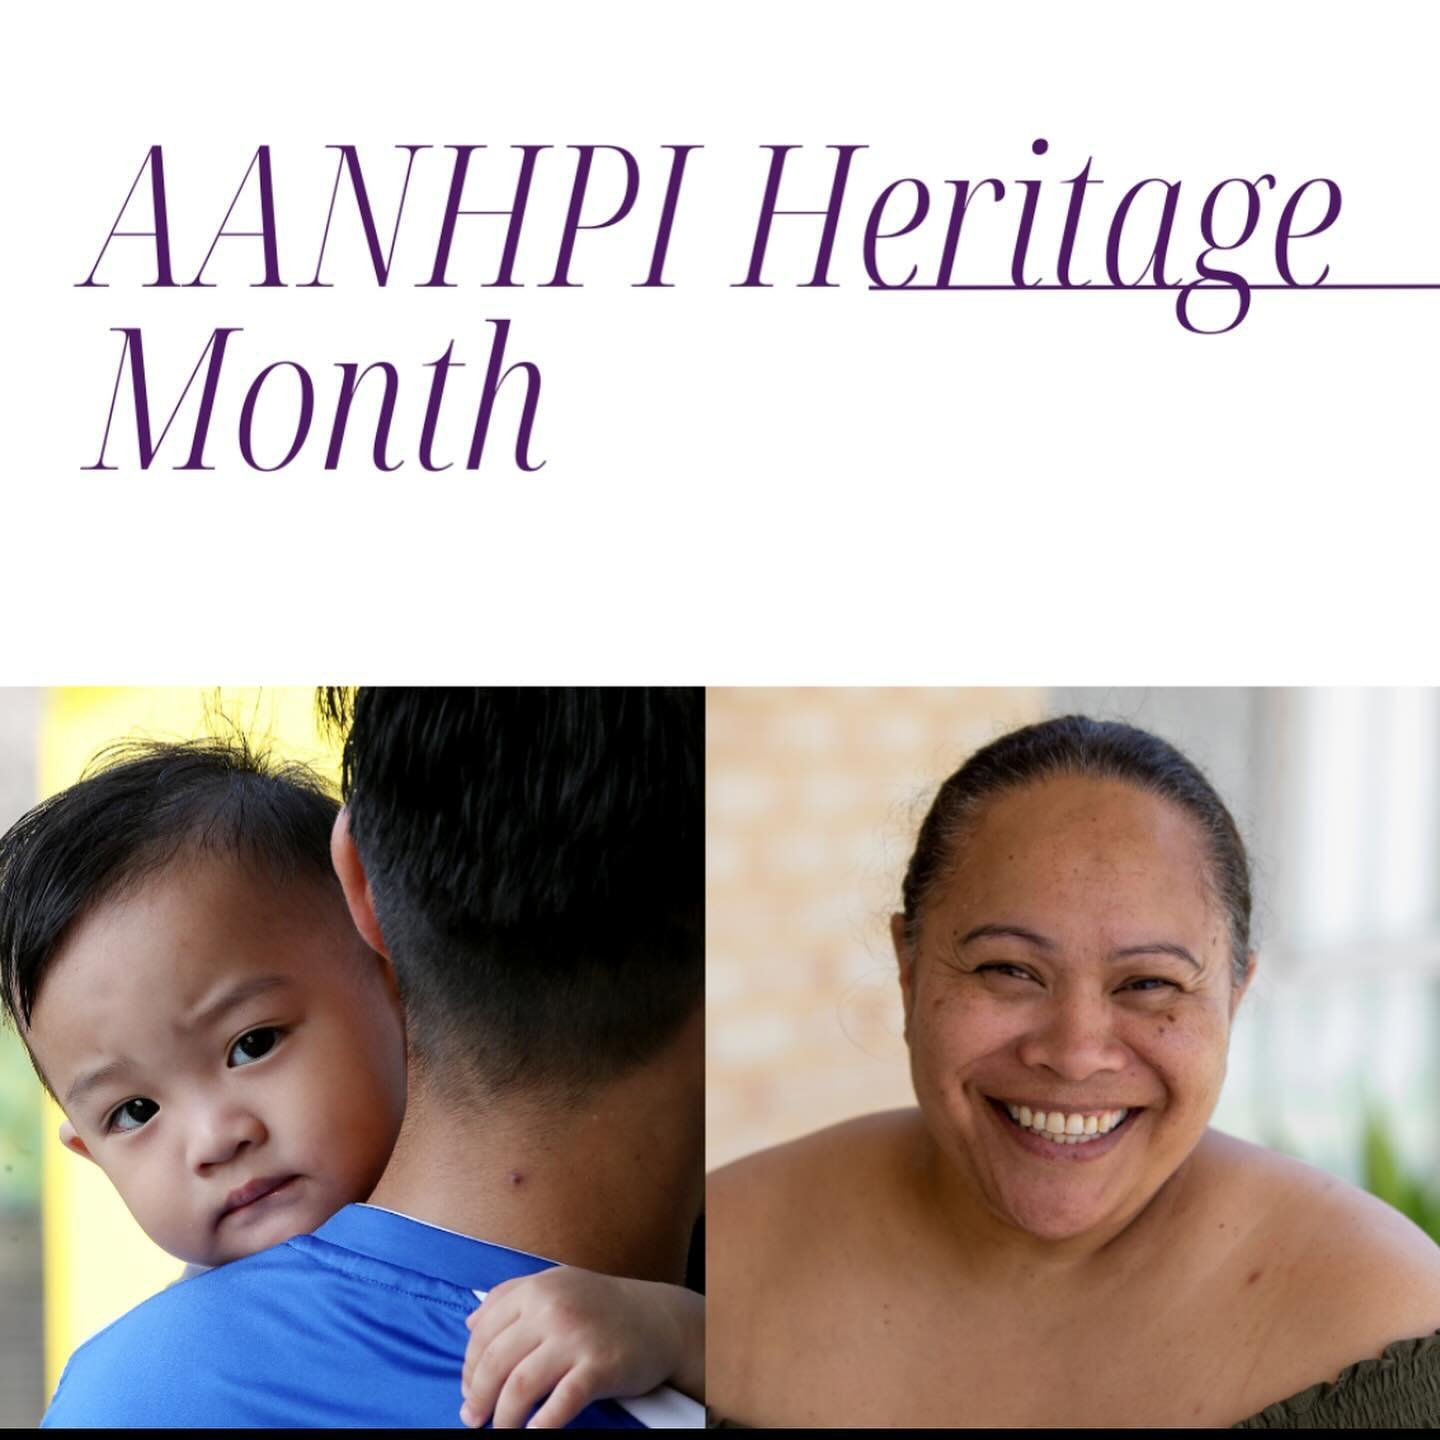 May is #AANHPIheritagemonth. During this time, we acknowledge the high rates of domestic violence the Asian American, Native Hawaiian, and Pacific Islander communities face. In order to overcome significant obstacles in accessing help, like language 